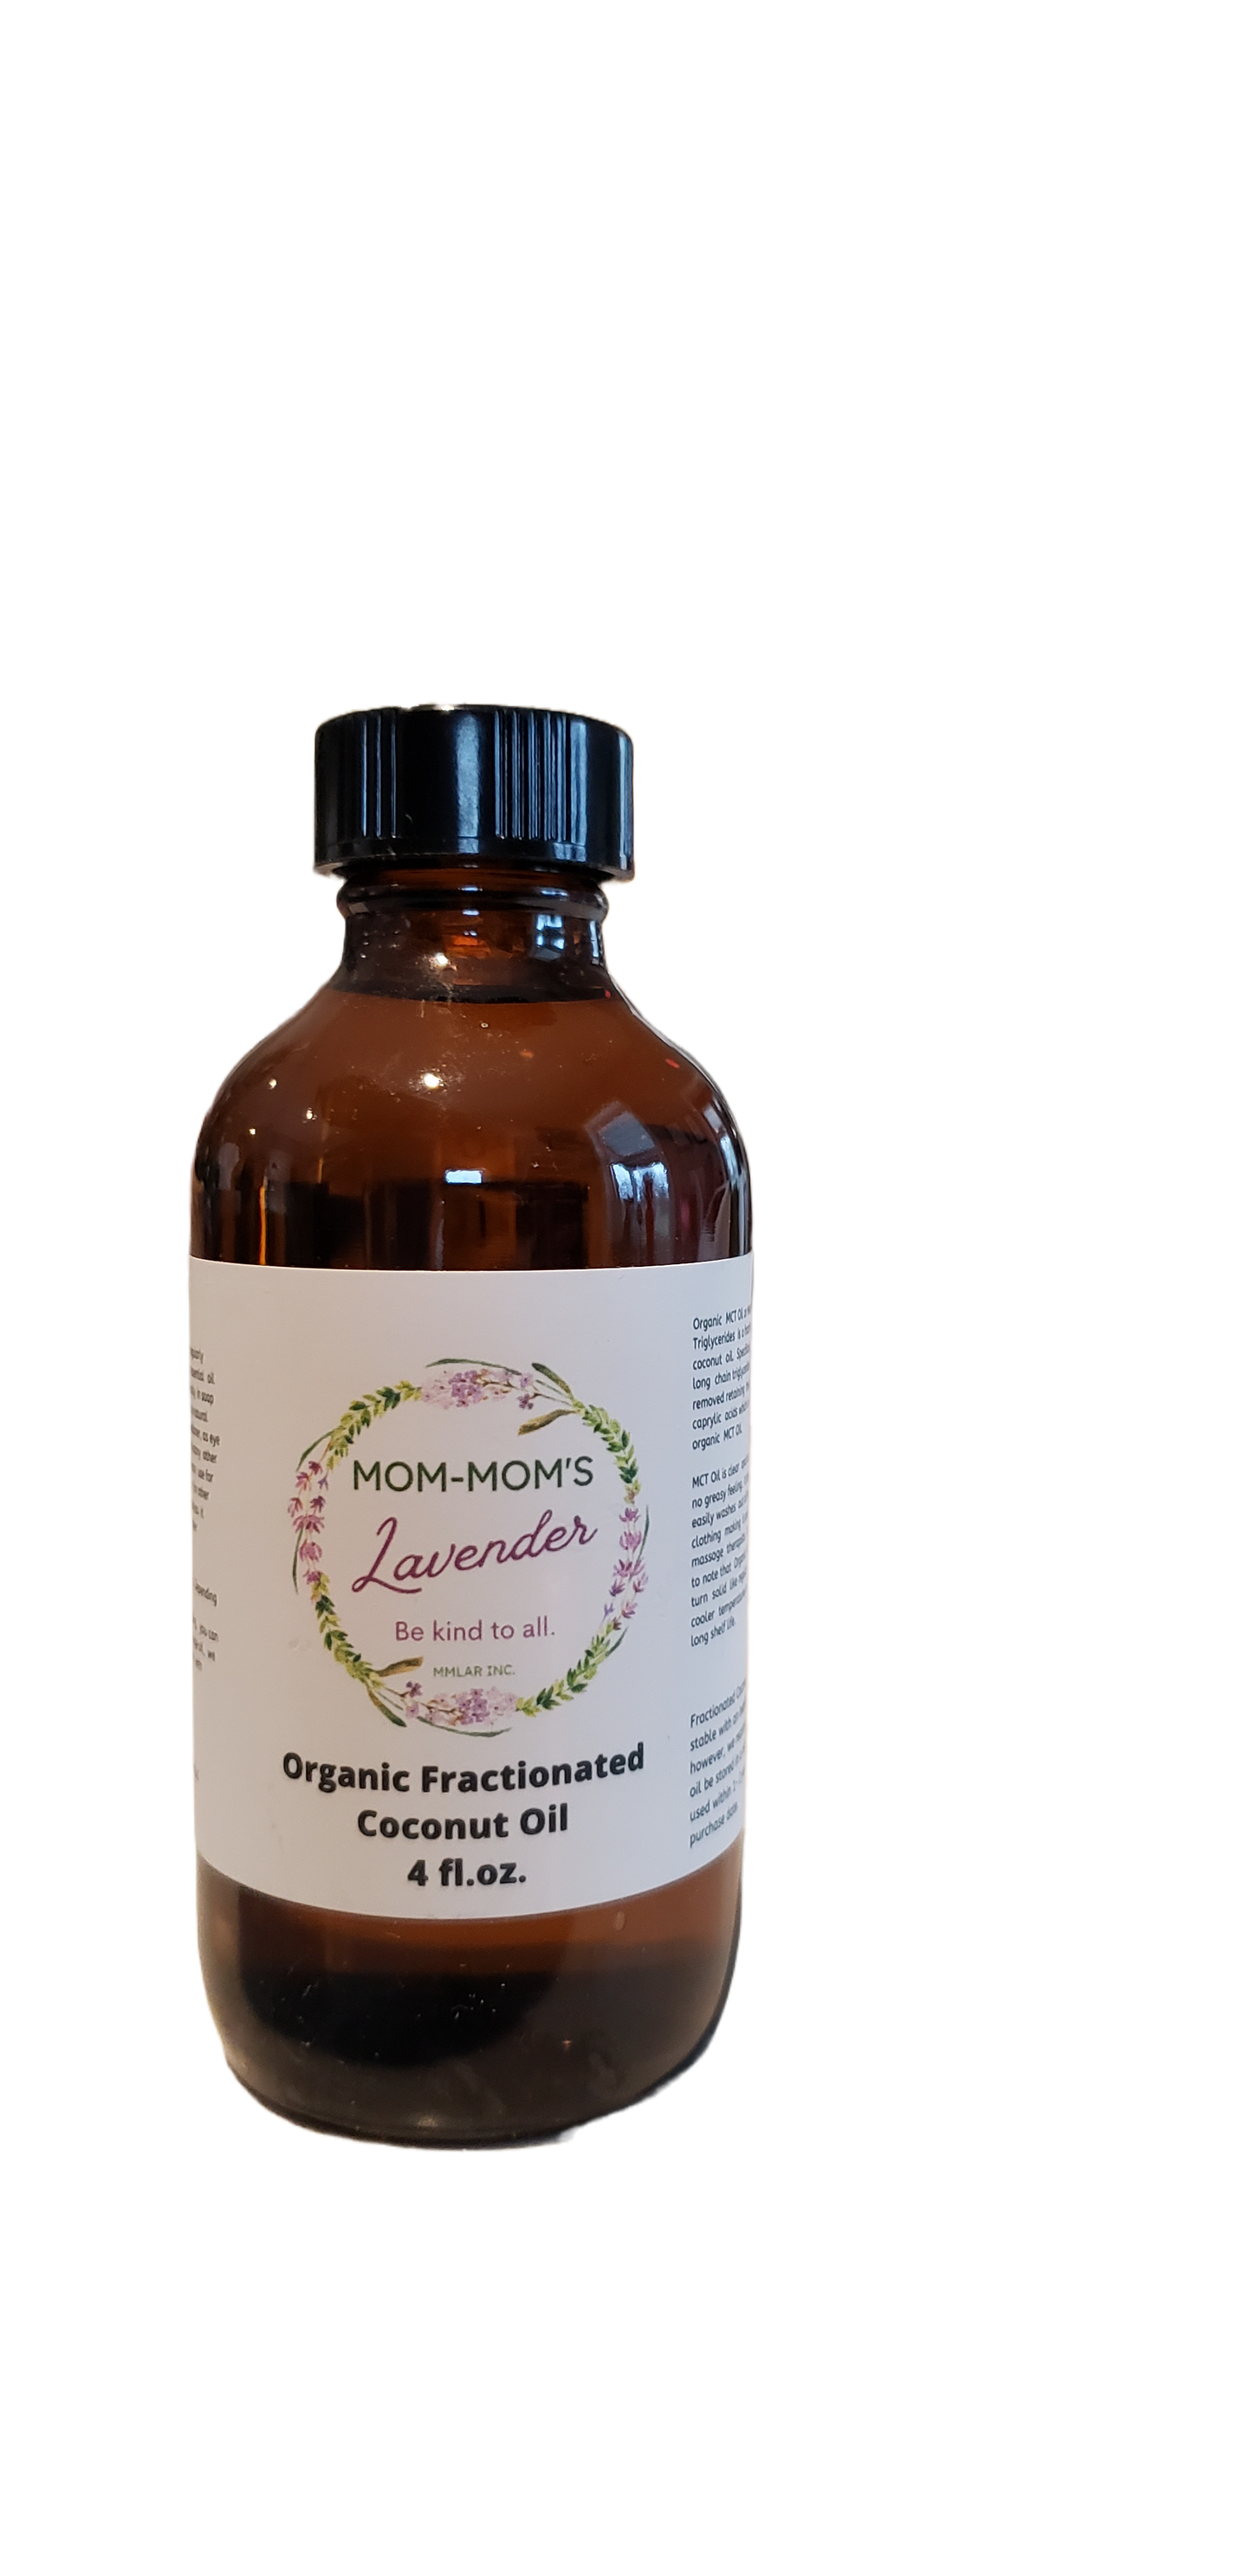 Fractionated Coconut Oil (MCT - Medium Chain Triglycerides)